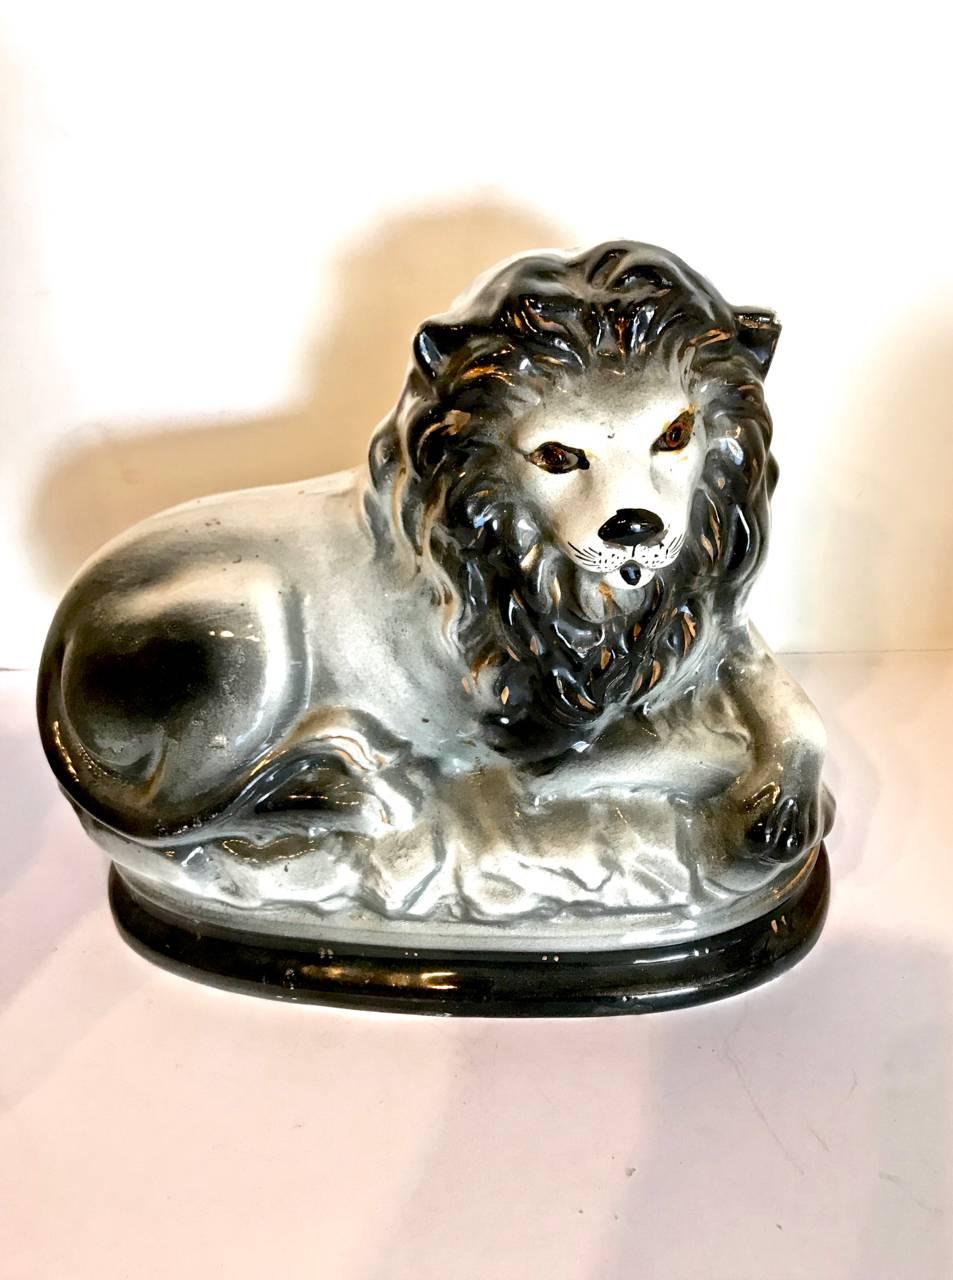 This is an iconic Staffordshire recumbent lion in the uncommon black and white coloration. This beast is in overall very good to excellent condition. Integrates well into English country houseor traditional design.